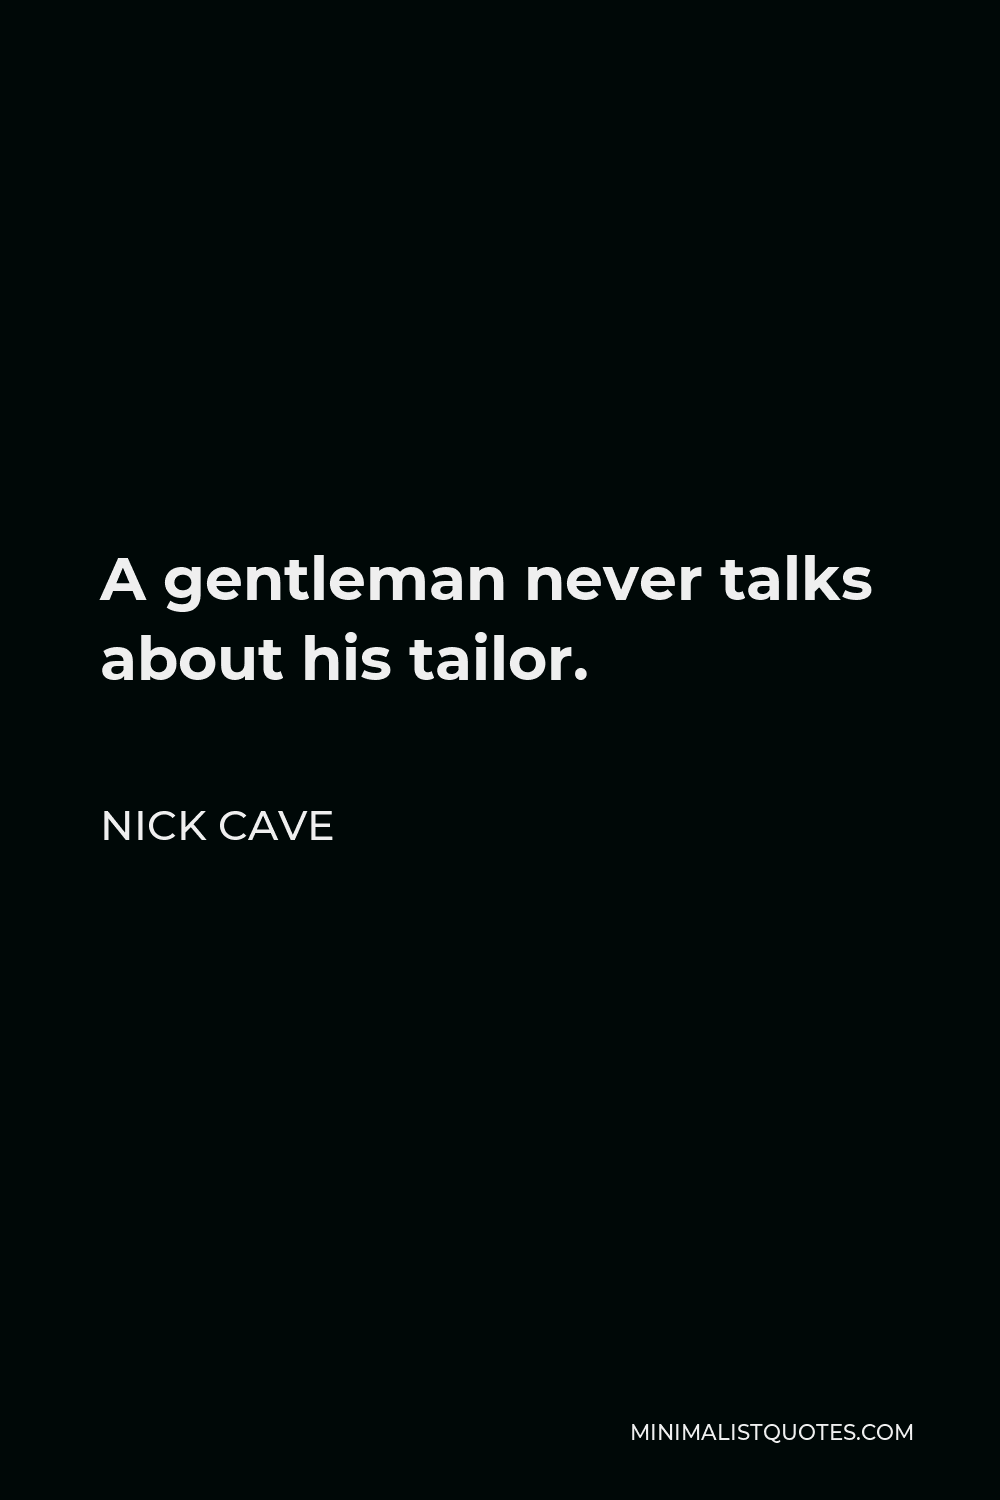 Nick Cave Quote - A gentleman never talks about his tailor.